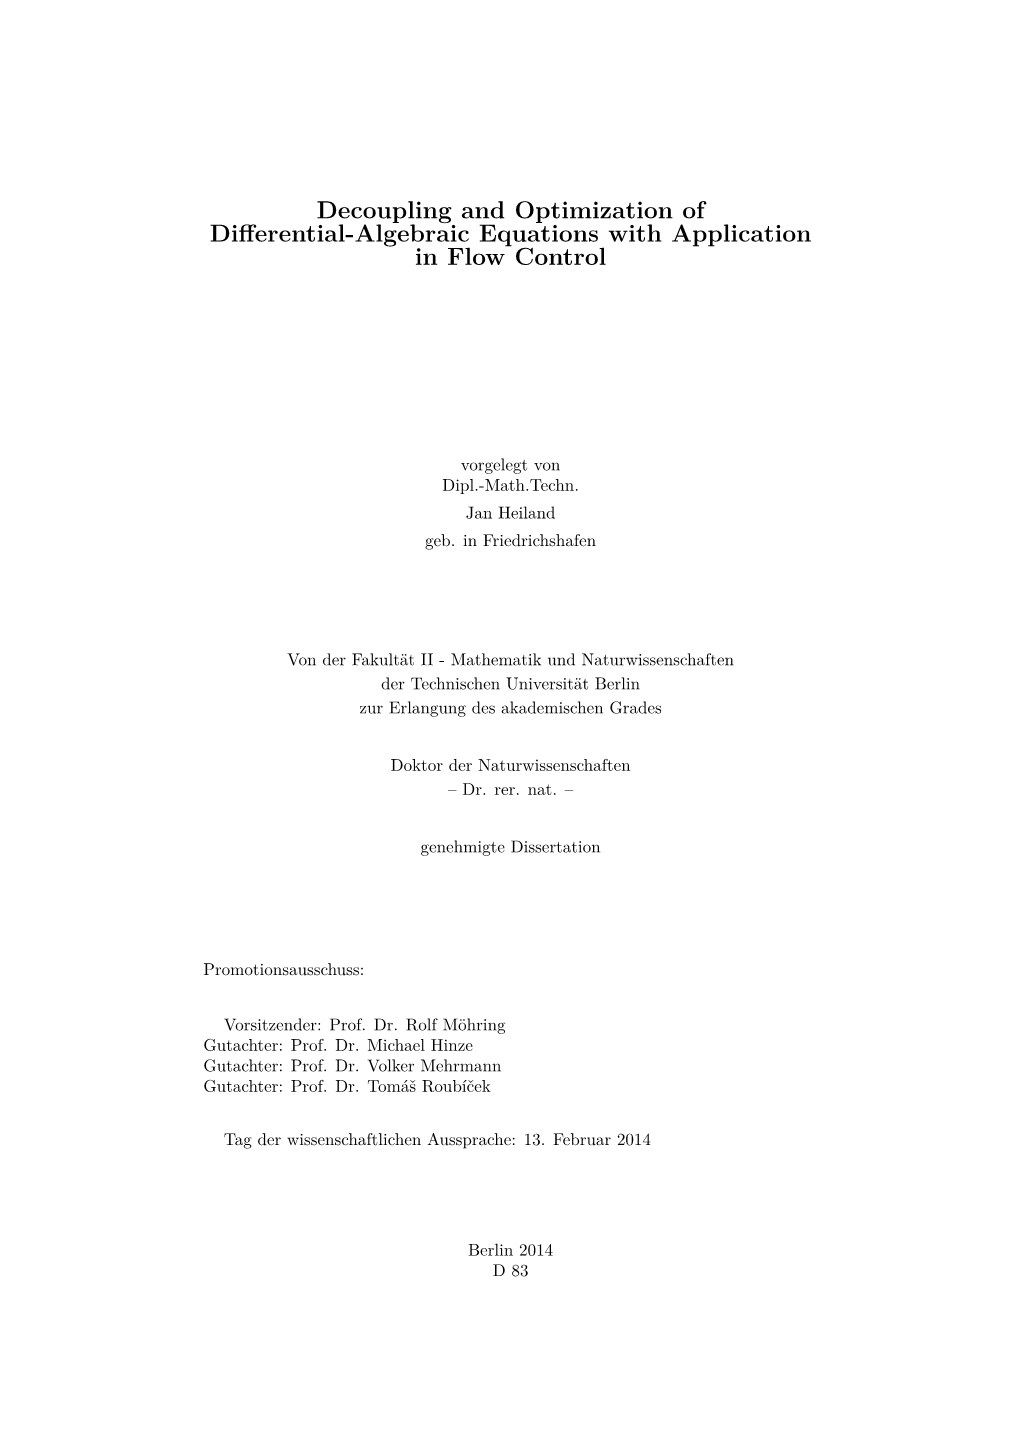 Decoupling and Optimization of Differential-Algebraic Equations